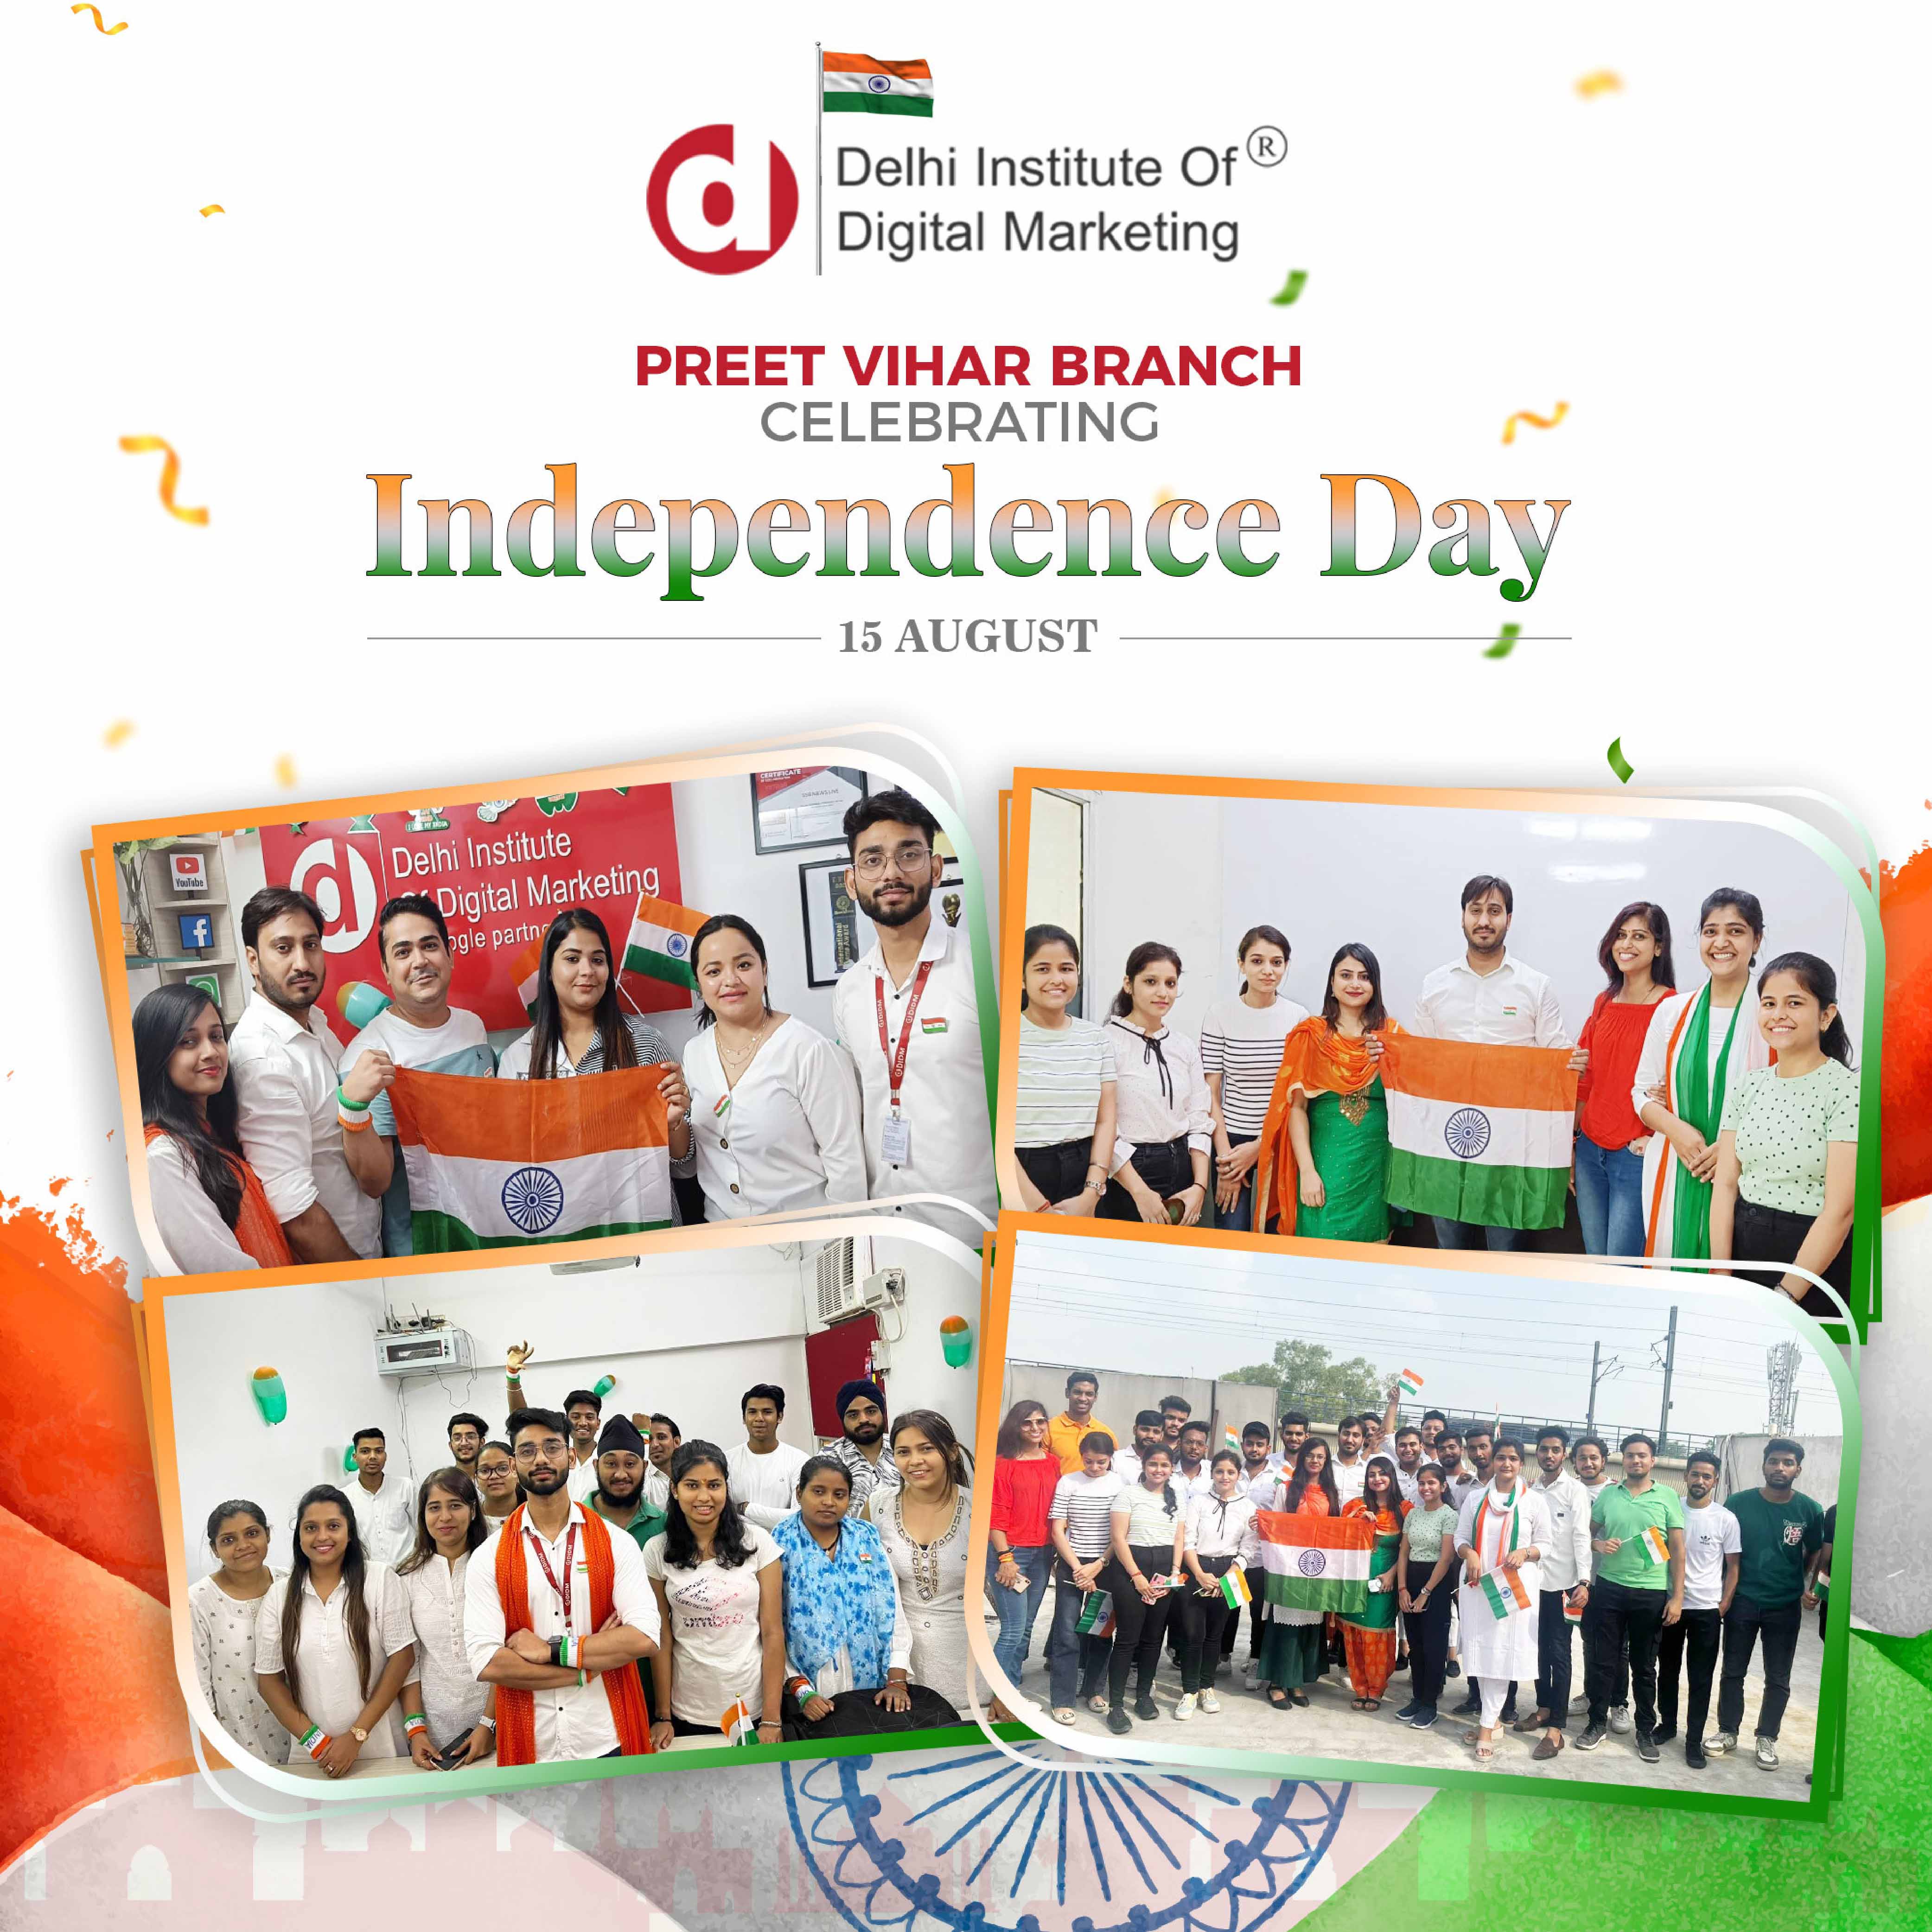 DIDM Preet Vihar Branch is celebrating its 77th Independence Day